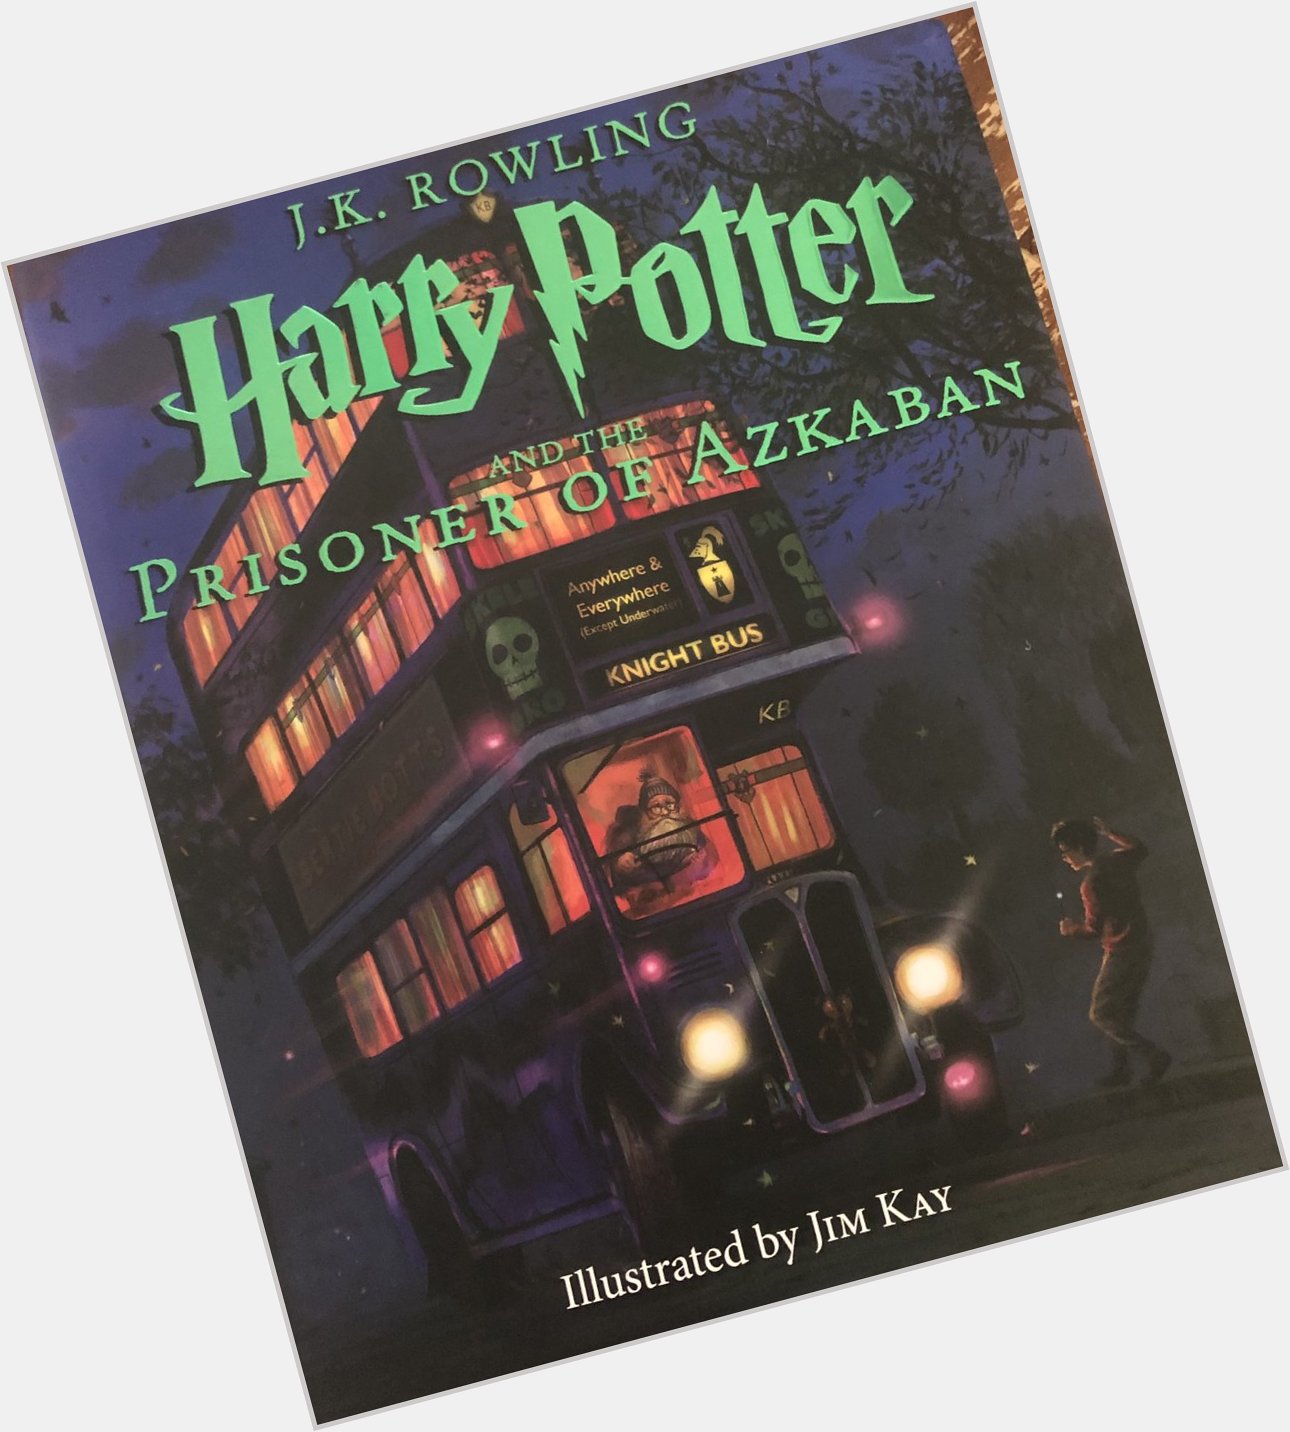 Happy 20th birthday to the best Harry Potter book. 